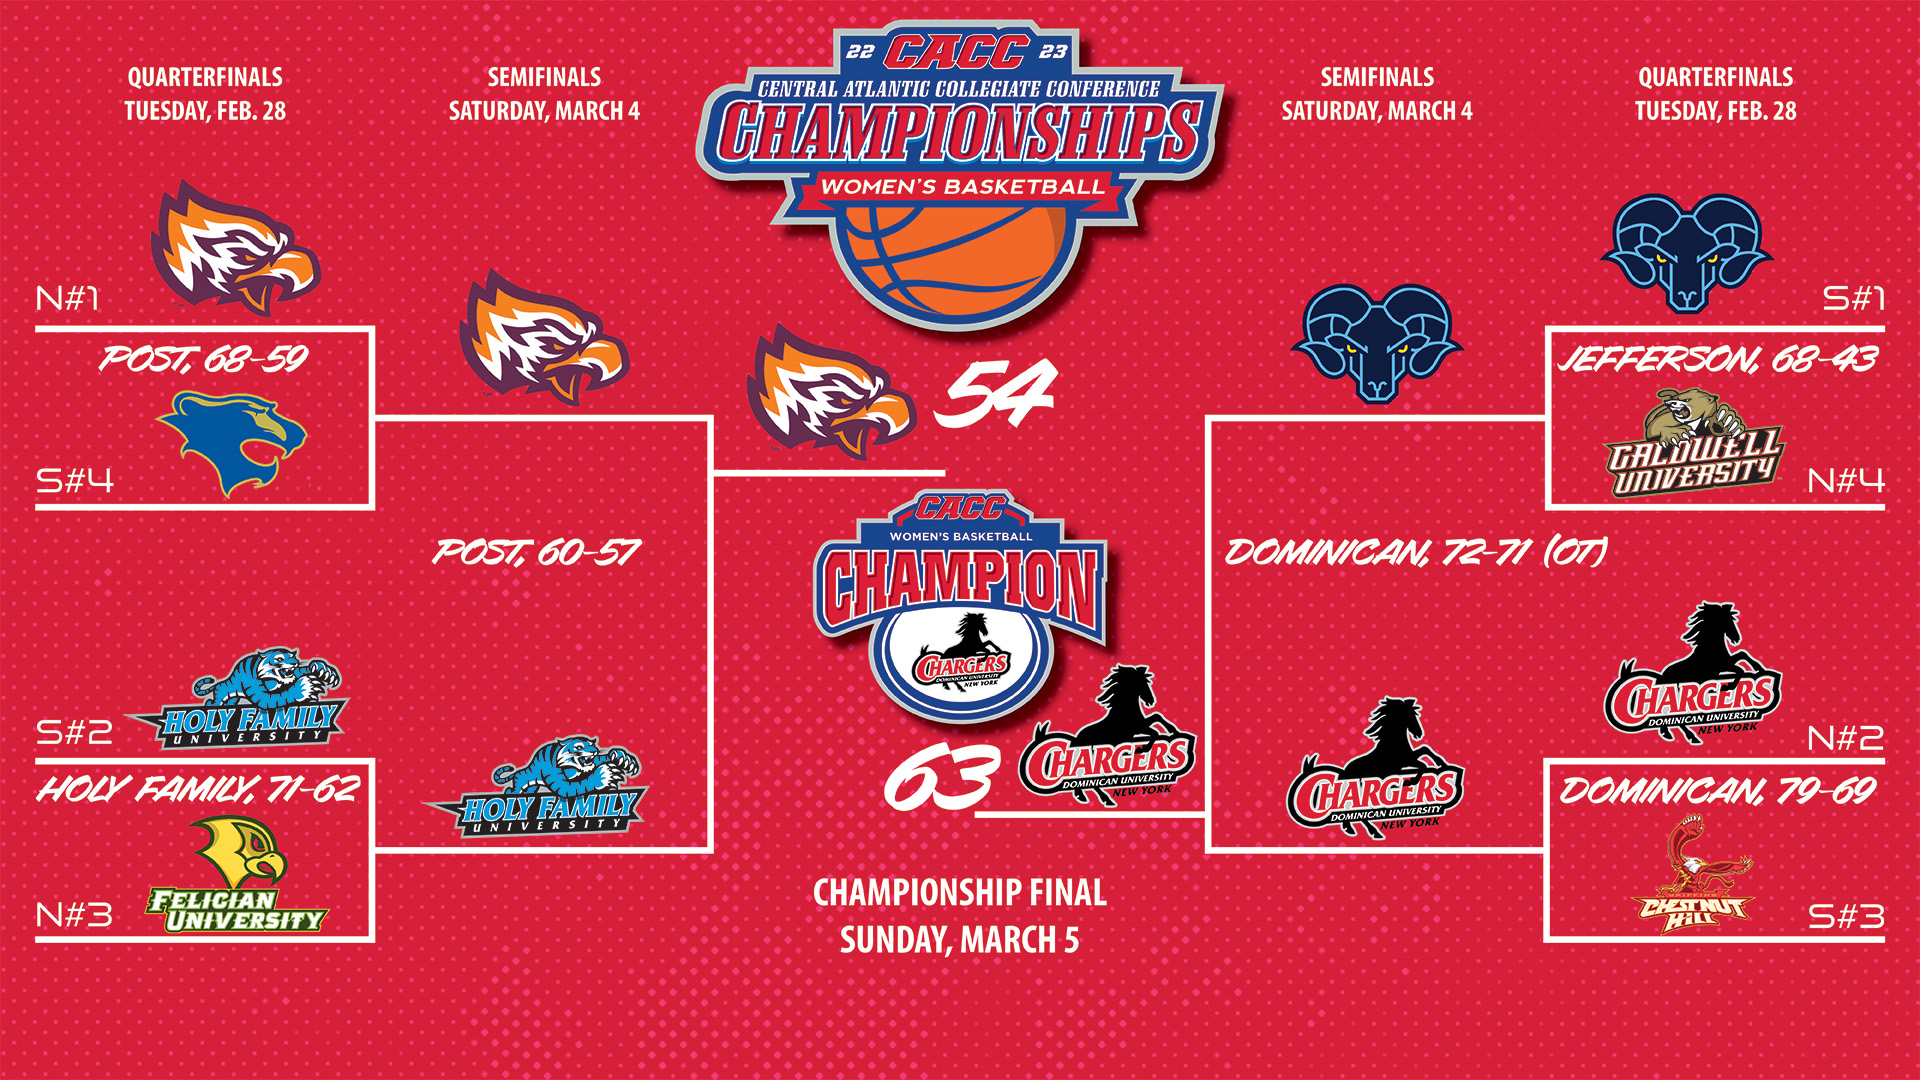 2022-23 CACC WOMEN'S BASKETBALL CHAMPIONSHIP CENTRAL